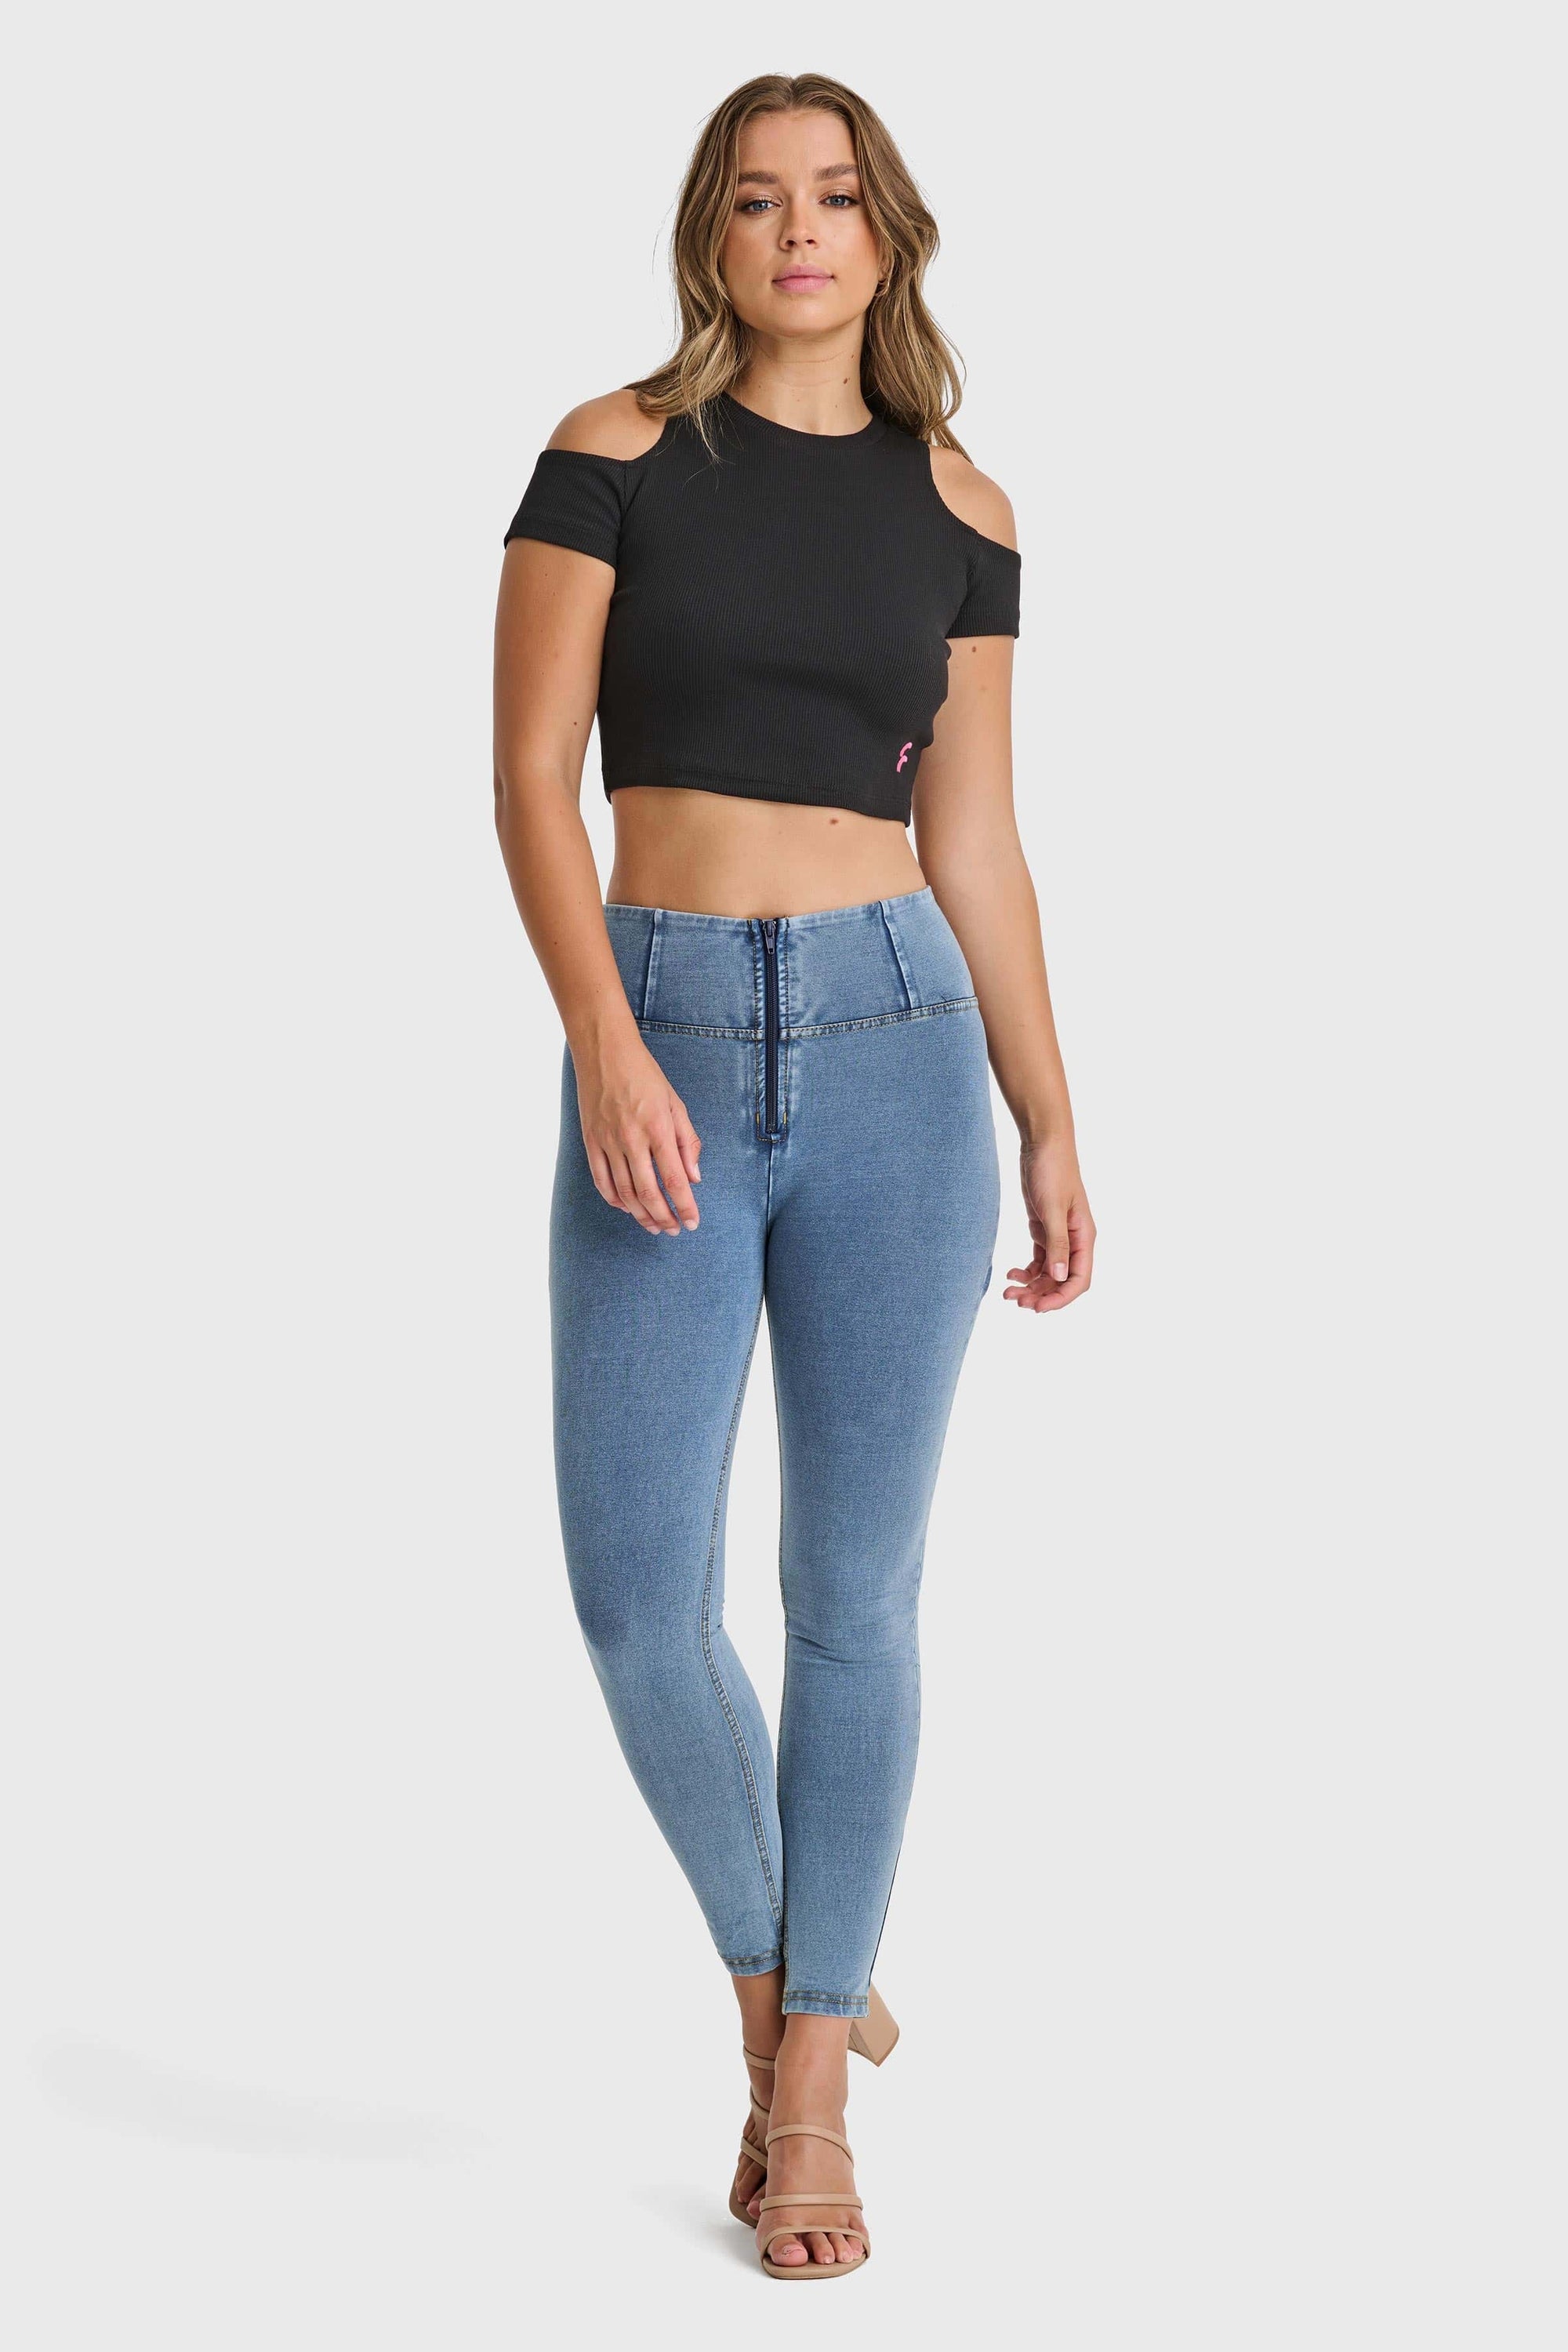 Cropped Cut Out T Shirt - Black 4